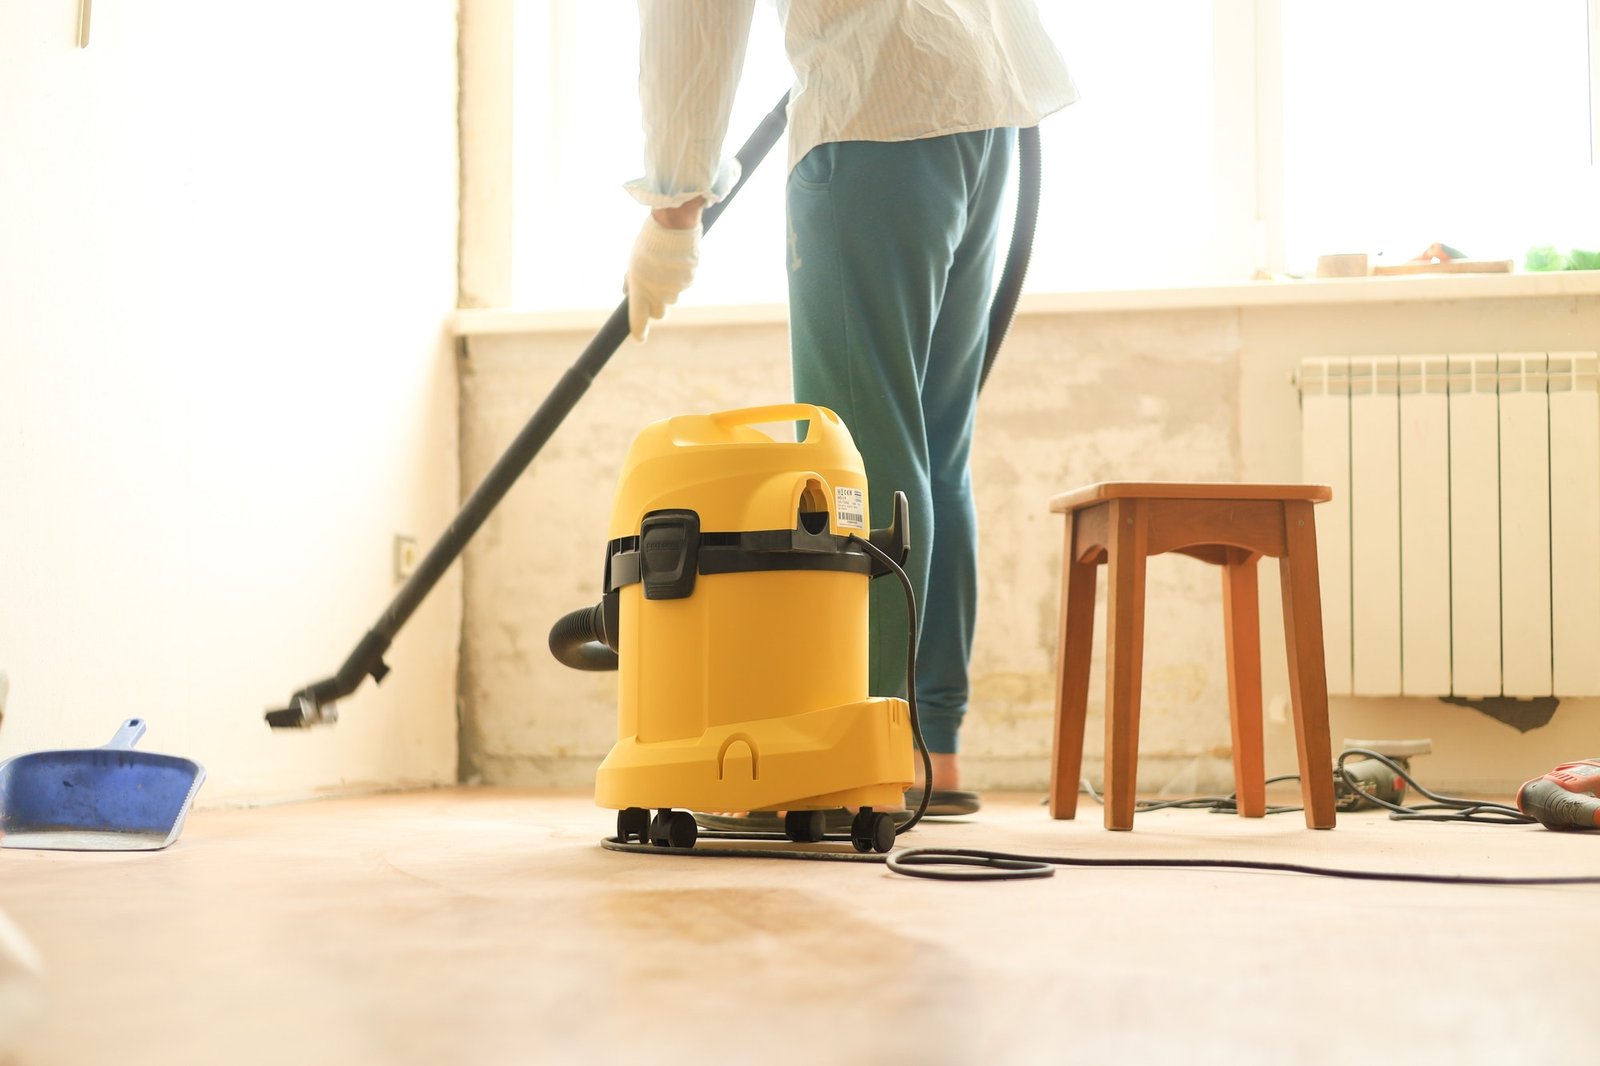 A man is cleaning the room during repairs using a construction vacuum cleaner